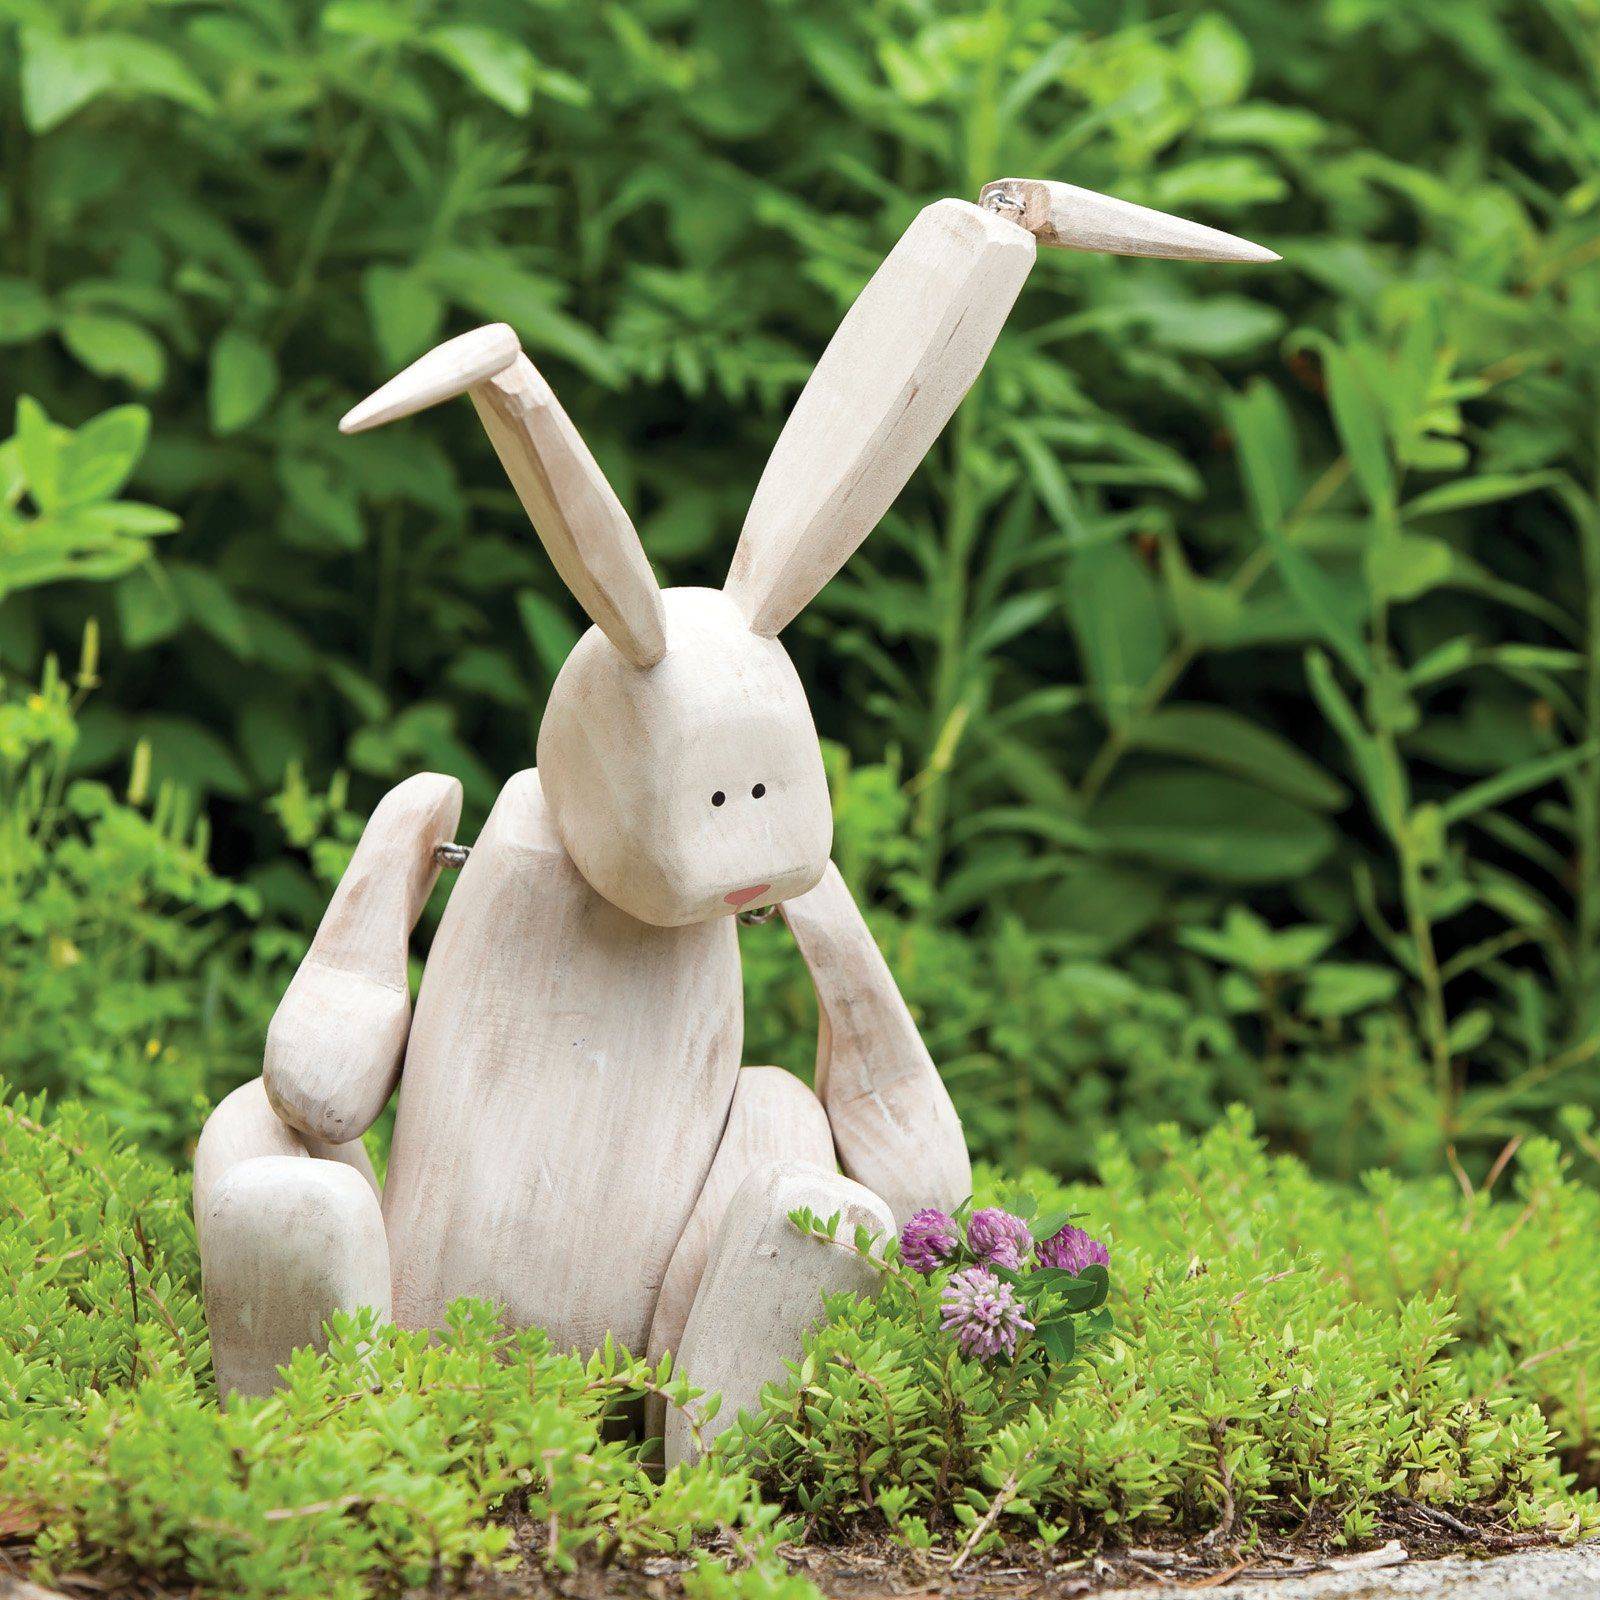 Entertaining Animal Statue Outdoor Spring Decorations Style Motivation